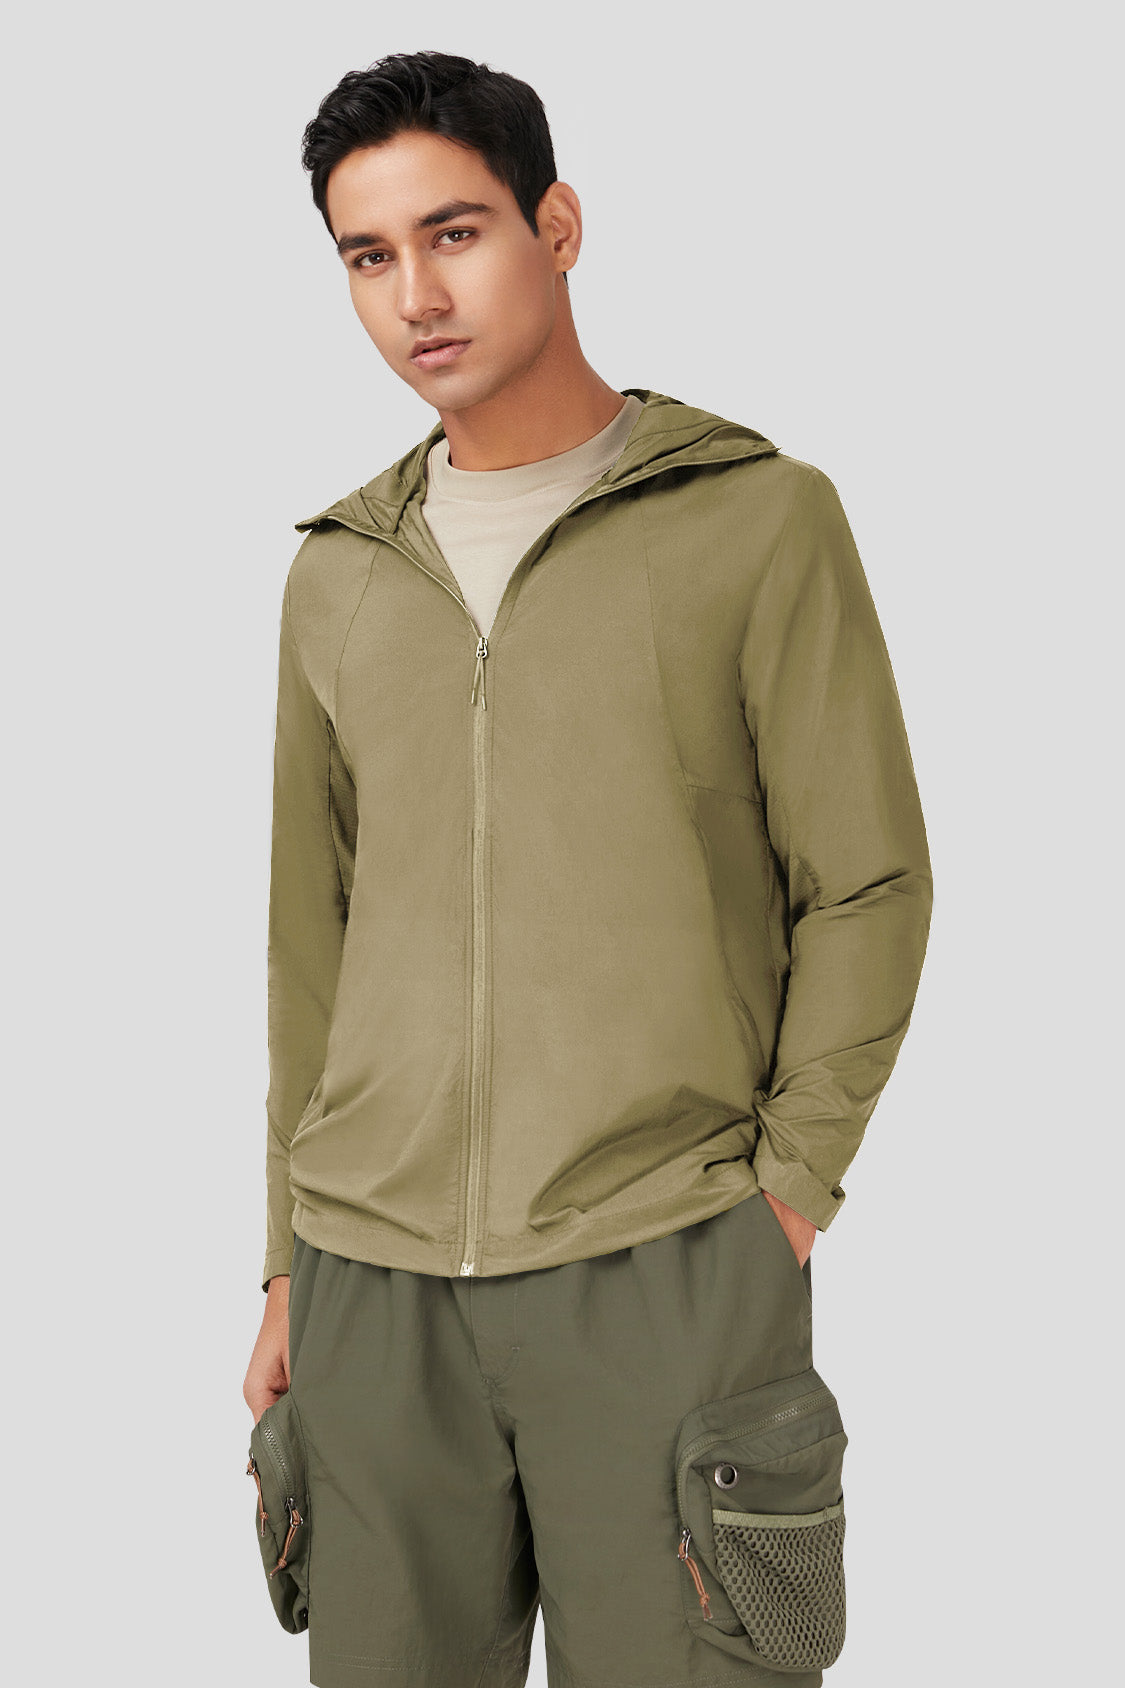 Sun Protection Jacket Hoodie With Pockets For Men Lightweight